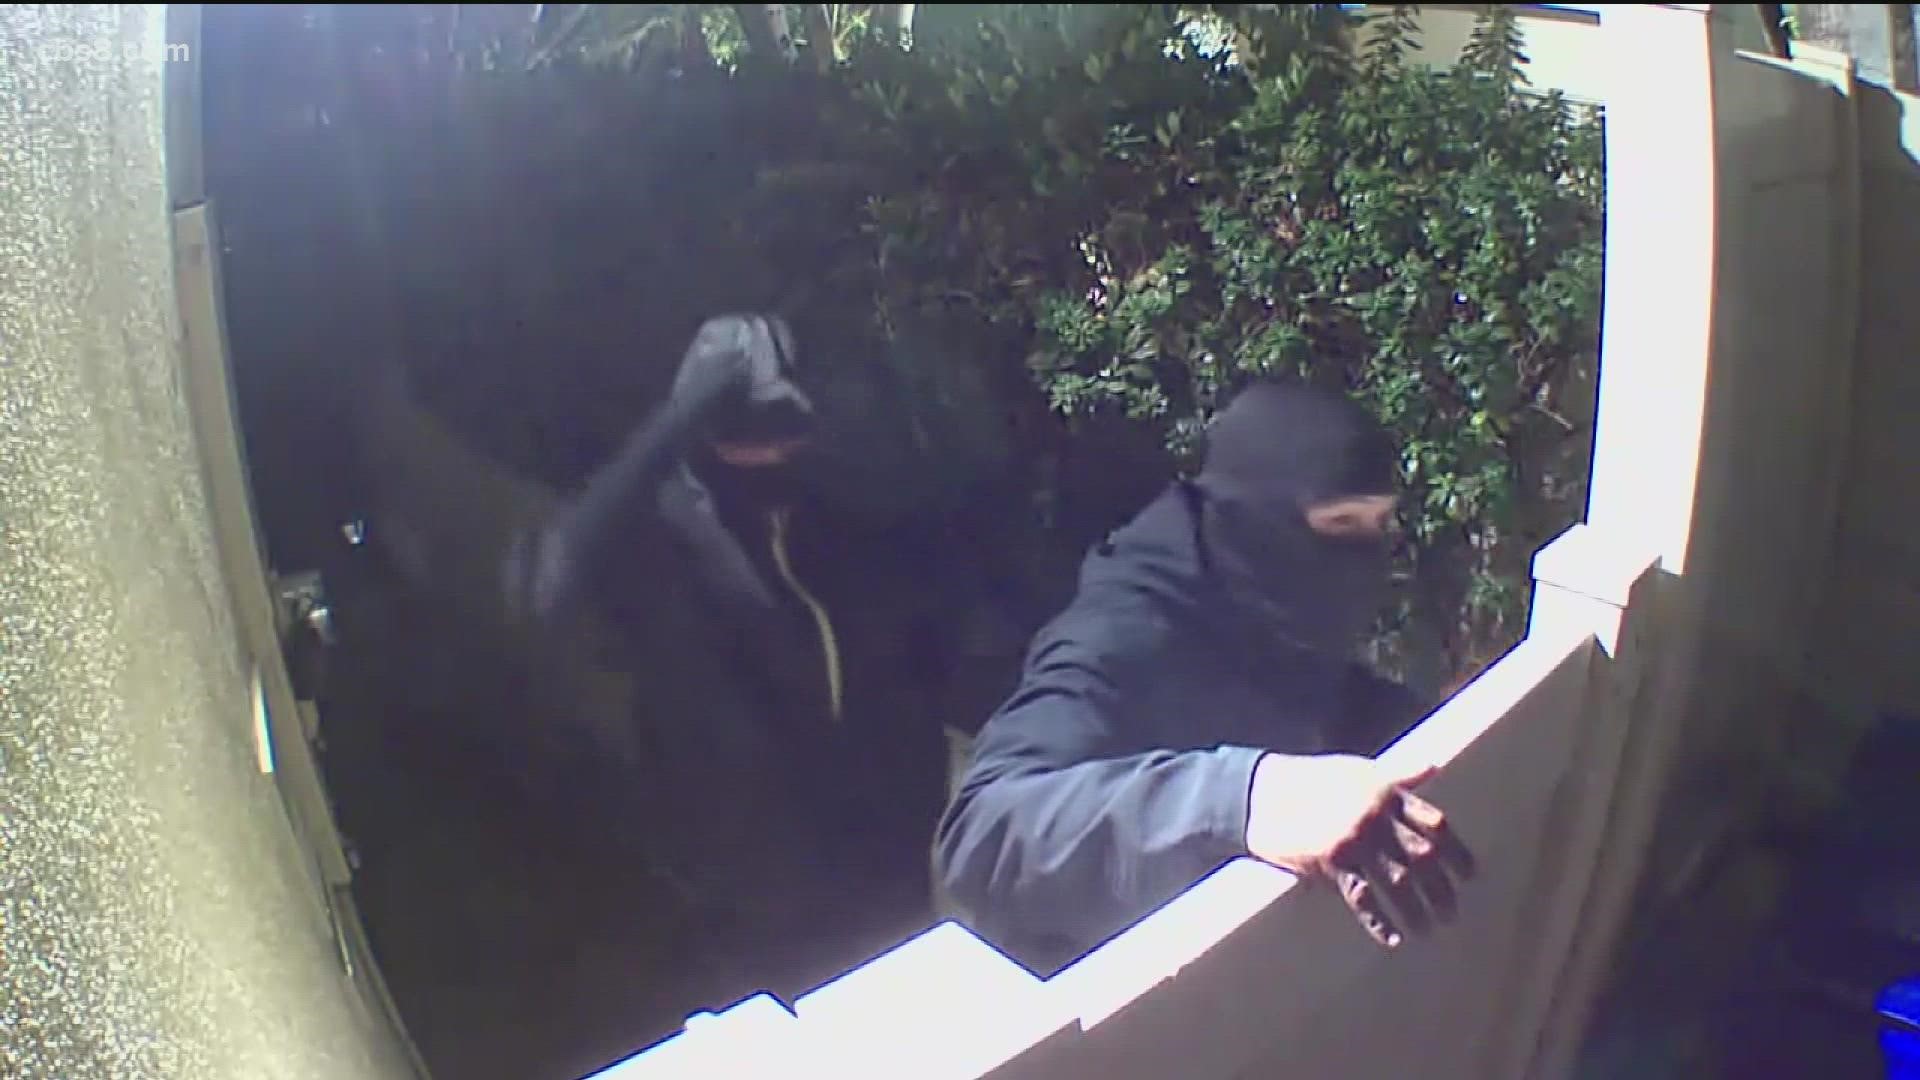 Since January 21, SDPD says there hasn't been a burglary that fits the profile.